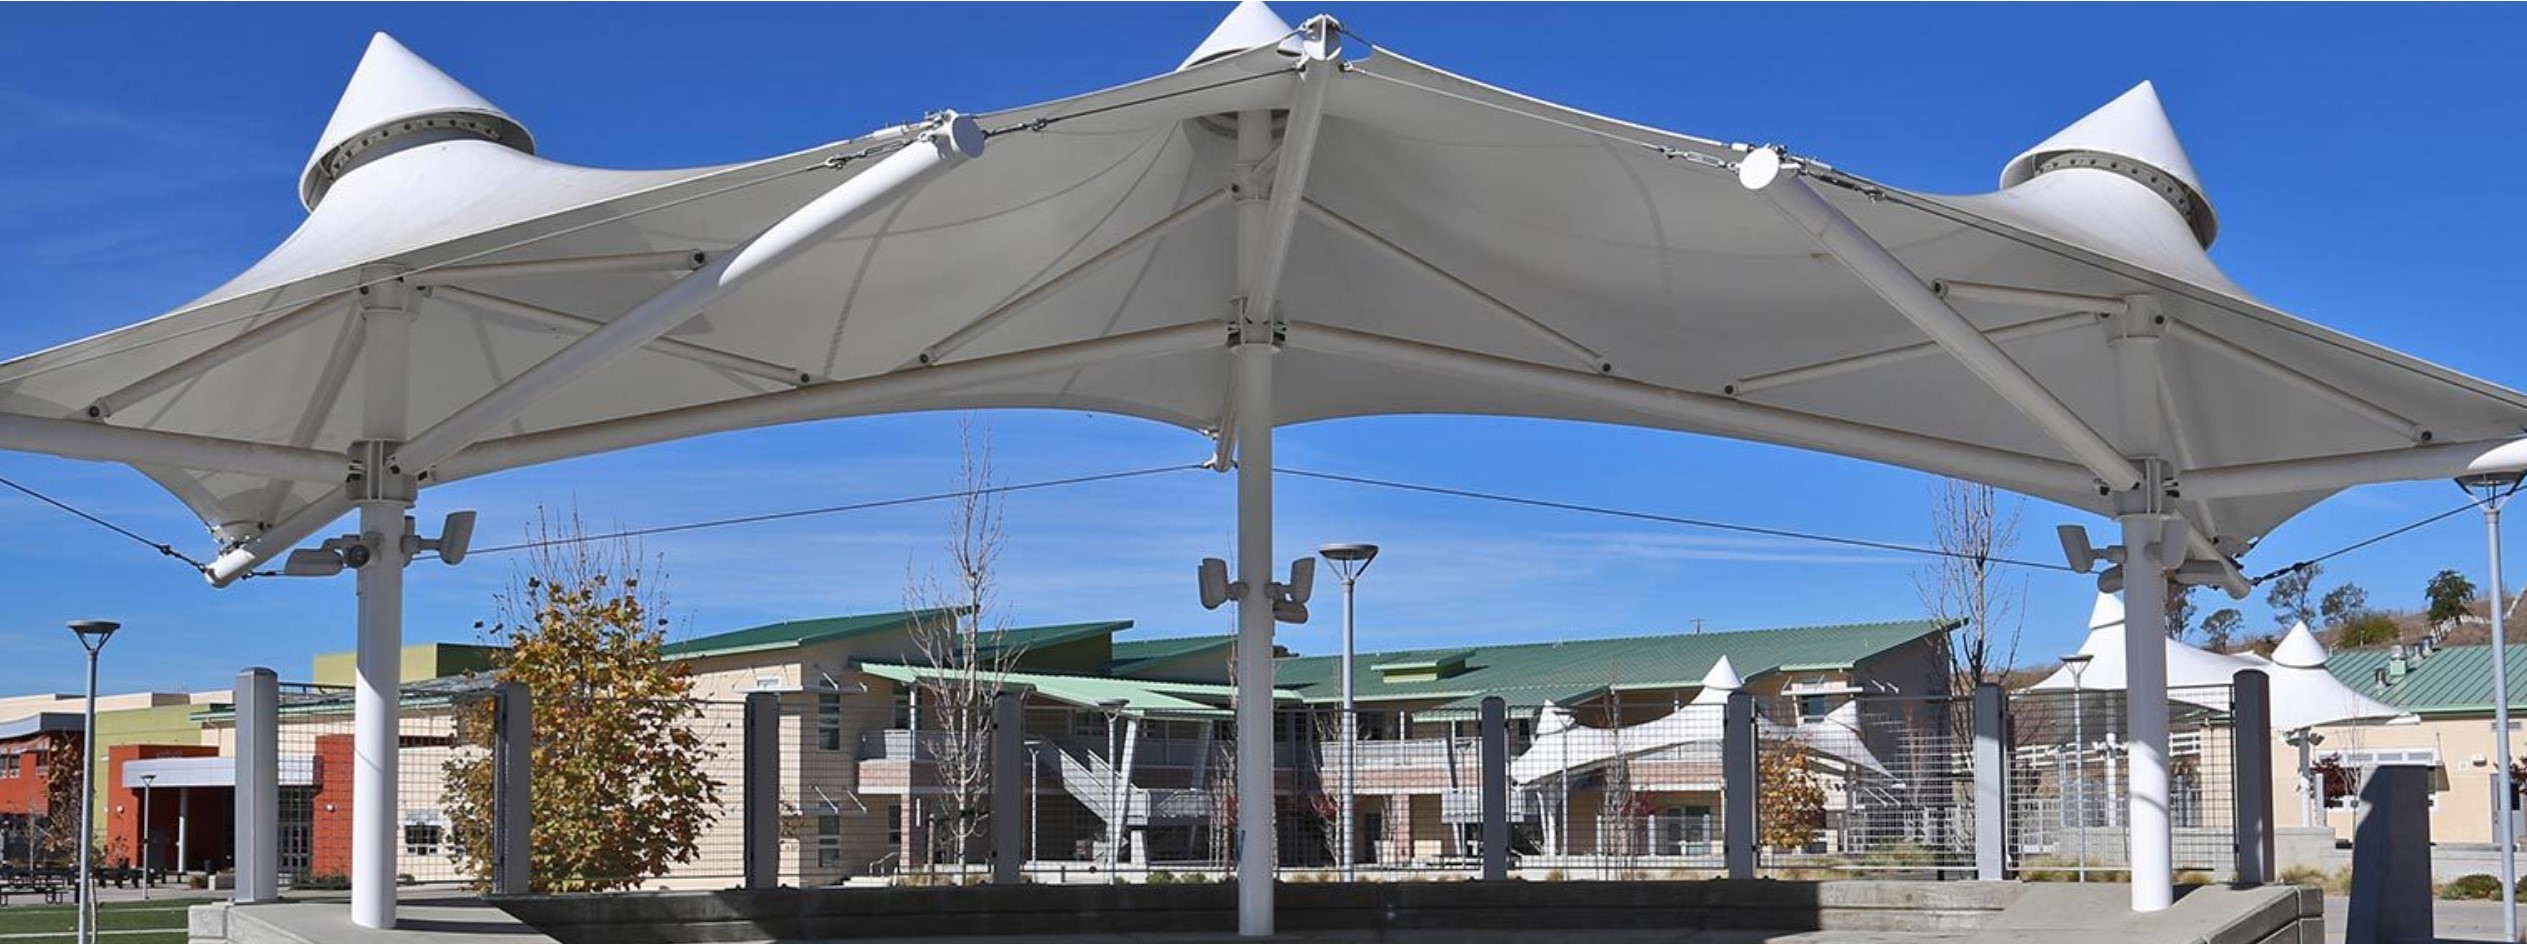 commercial awning tensile membrane structure